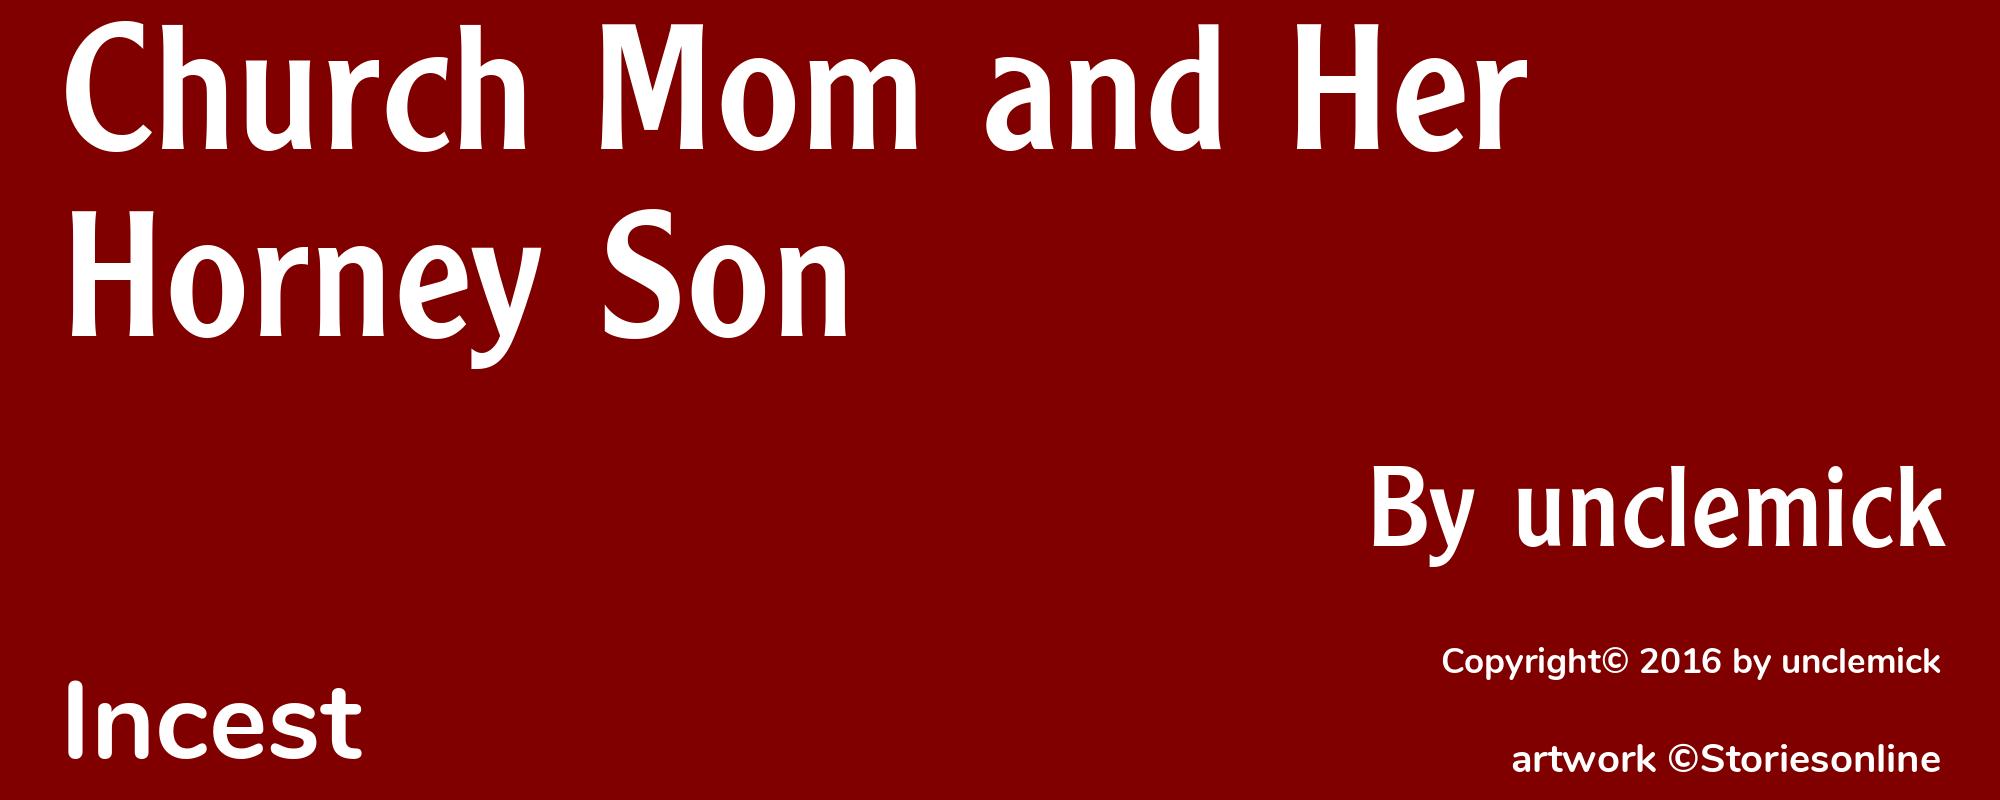 Church Mom and Her Horney Son - Cover